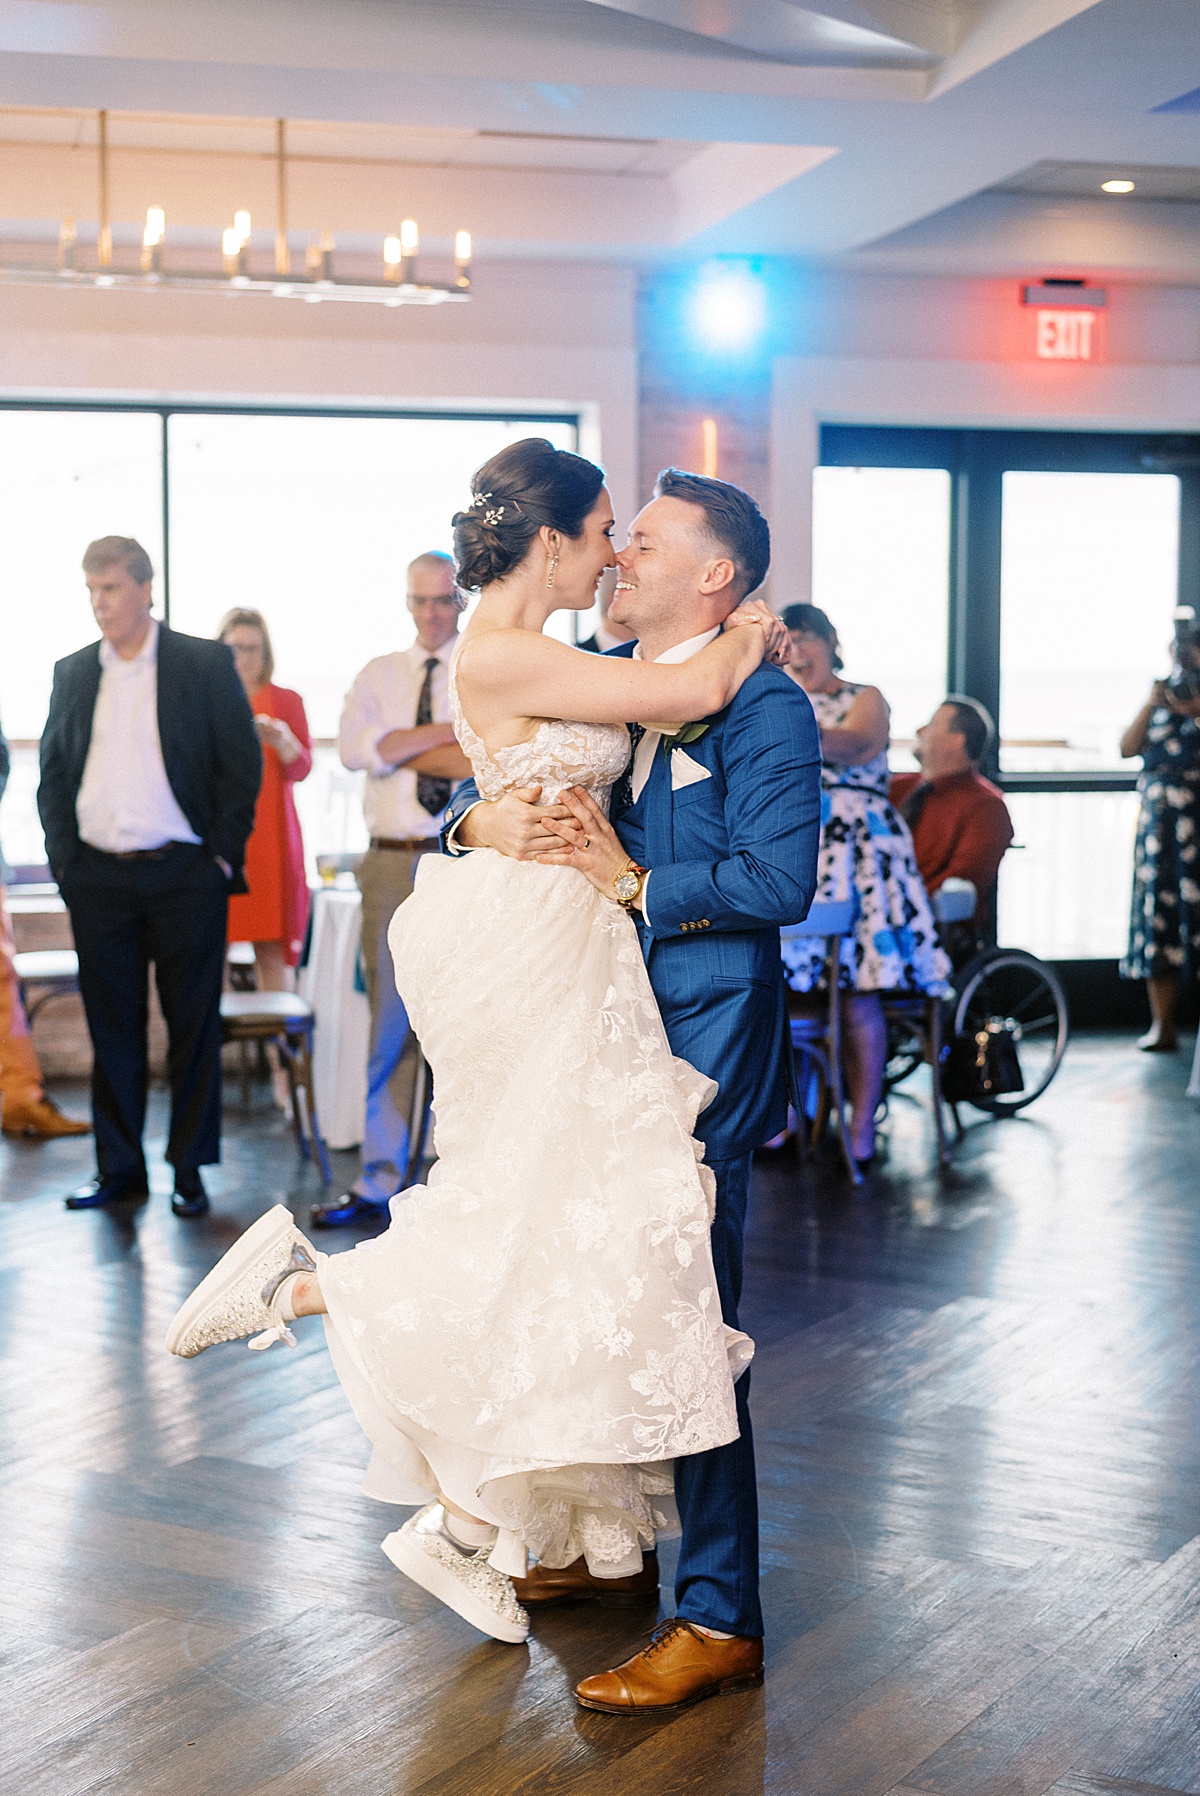 bride in lace gown and sneakers dances with groom in blue tux during first dance at reception shot by Massachusetts wedding photographer